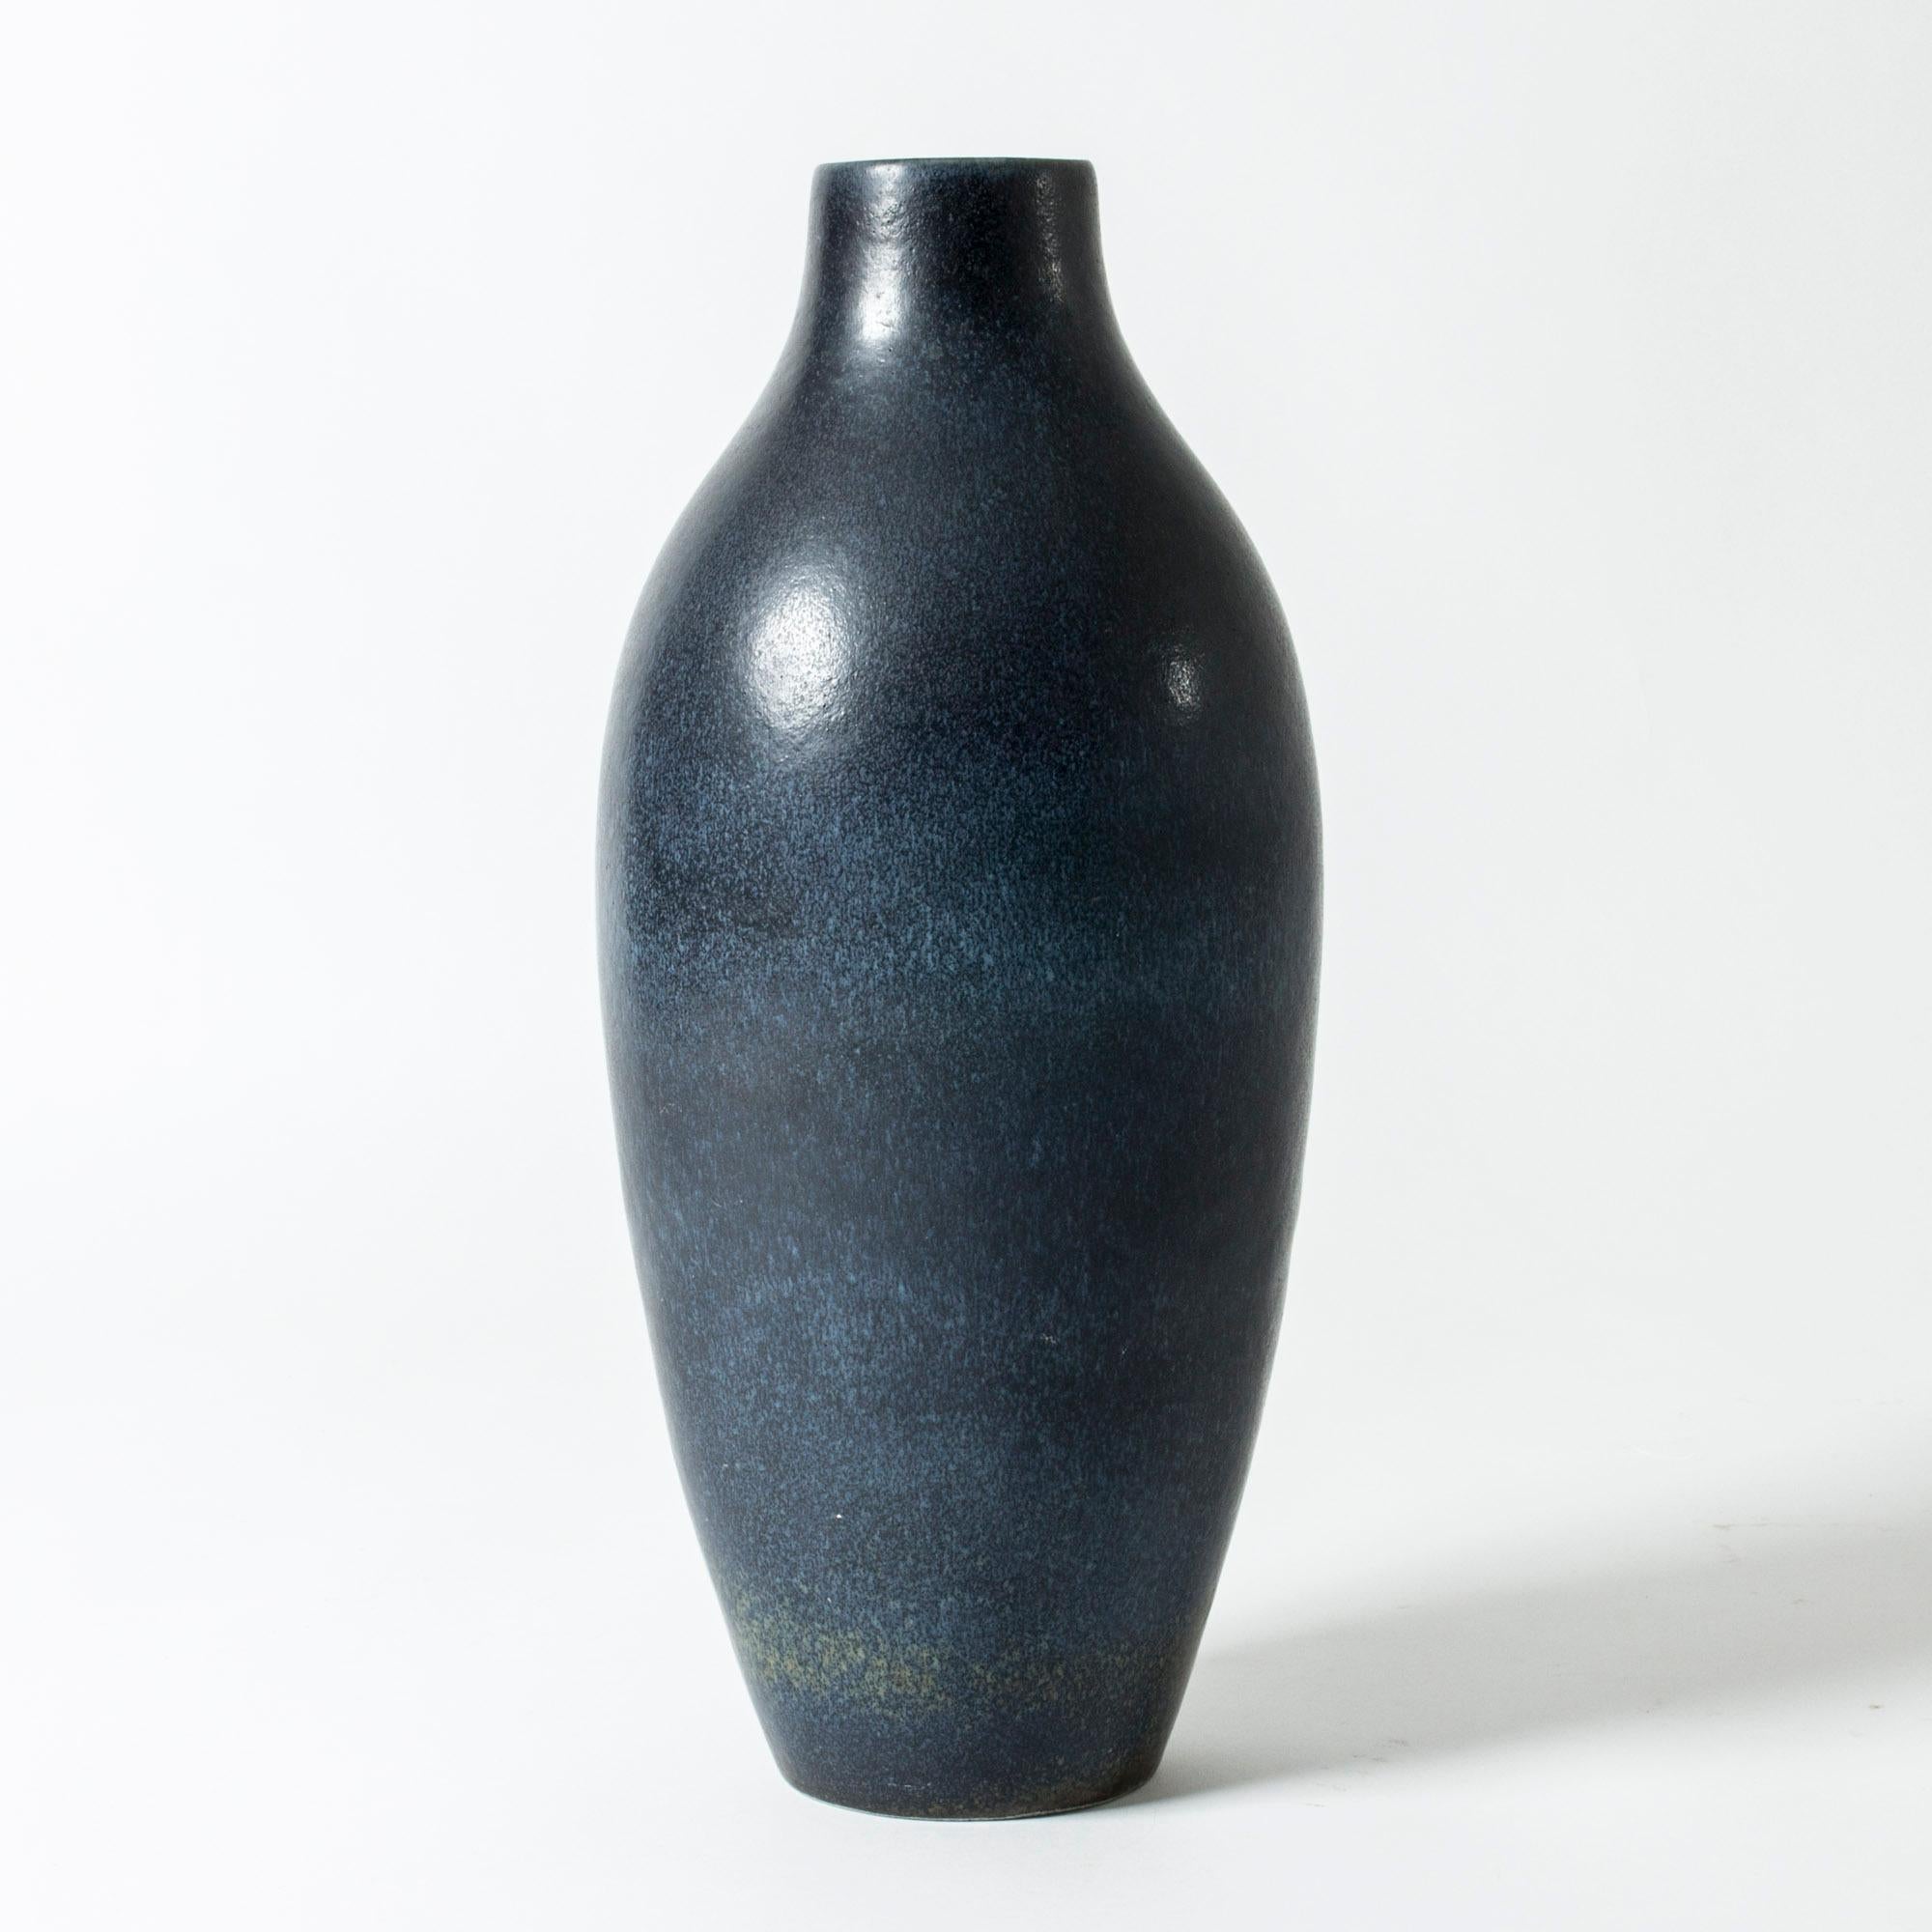 Statuesque stoneware floor vase by Carl-Harry Stålhane, in a clean form with beautiful dark blue hare’s fur glaze.

Carl-Harry Stålhane was one of the stars among Swedish ceramic artists during the 1950s, 1960s and 1970s, whose designs are just as